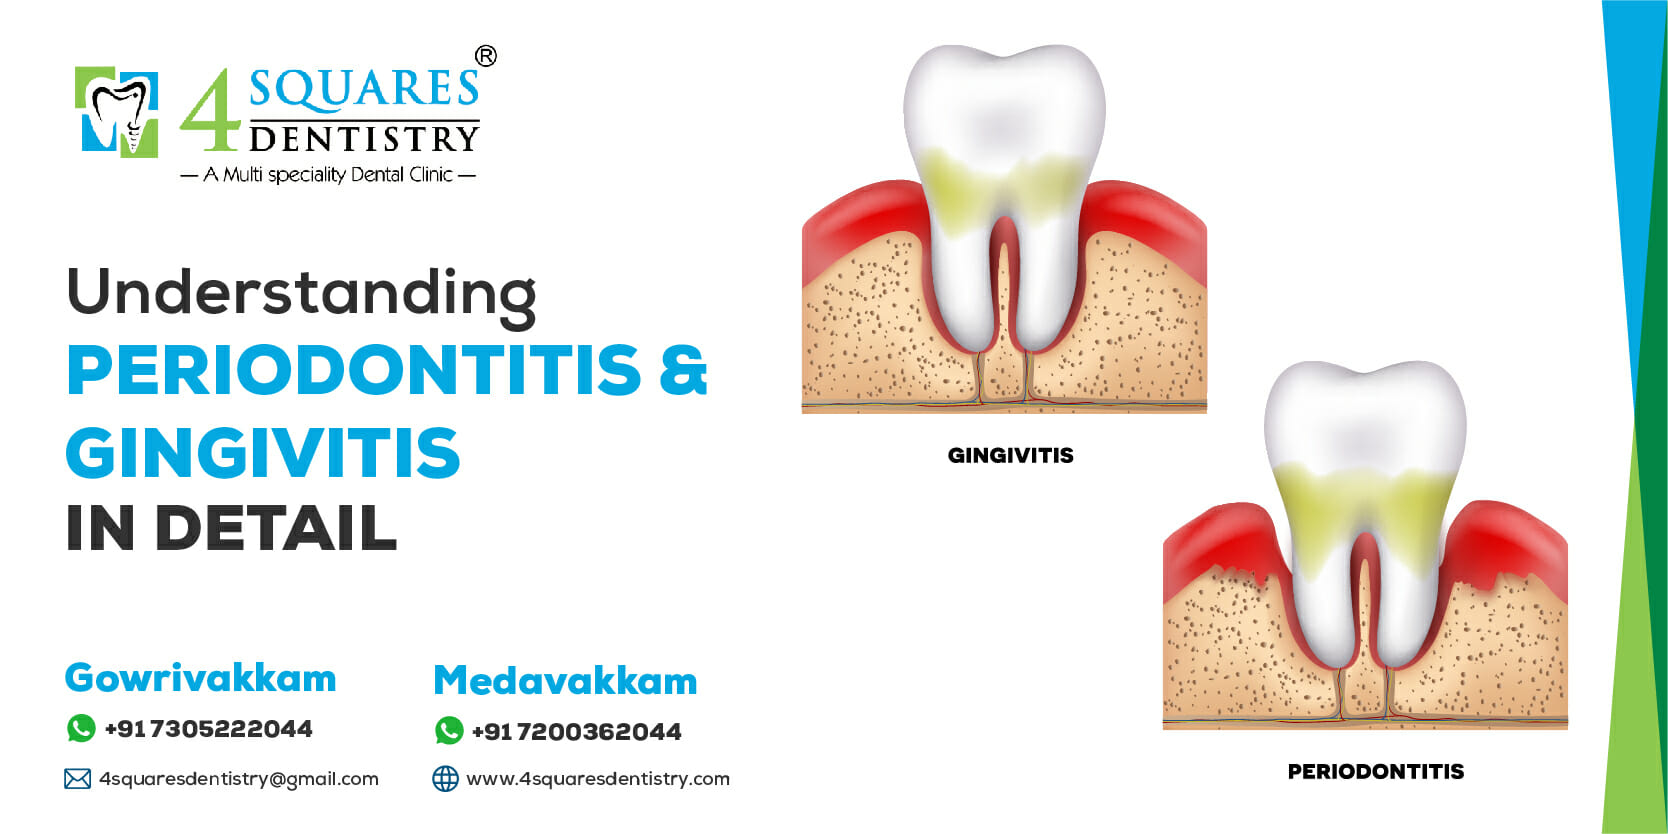 the logo and brand name of 4Squares Dentistry placed at top left corner with the text 'Understanding Gingivitis and Periodontitis in Detail' below the logo, the contact details for 4Squares Dentistry, Medavakkam and Gowrivakkam at the bottom left and 2 images of teeth, one affected by gingivitis(gum infection) and the other by periodontitis(advanced gum disease) on the right